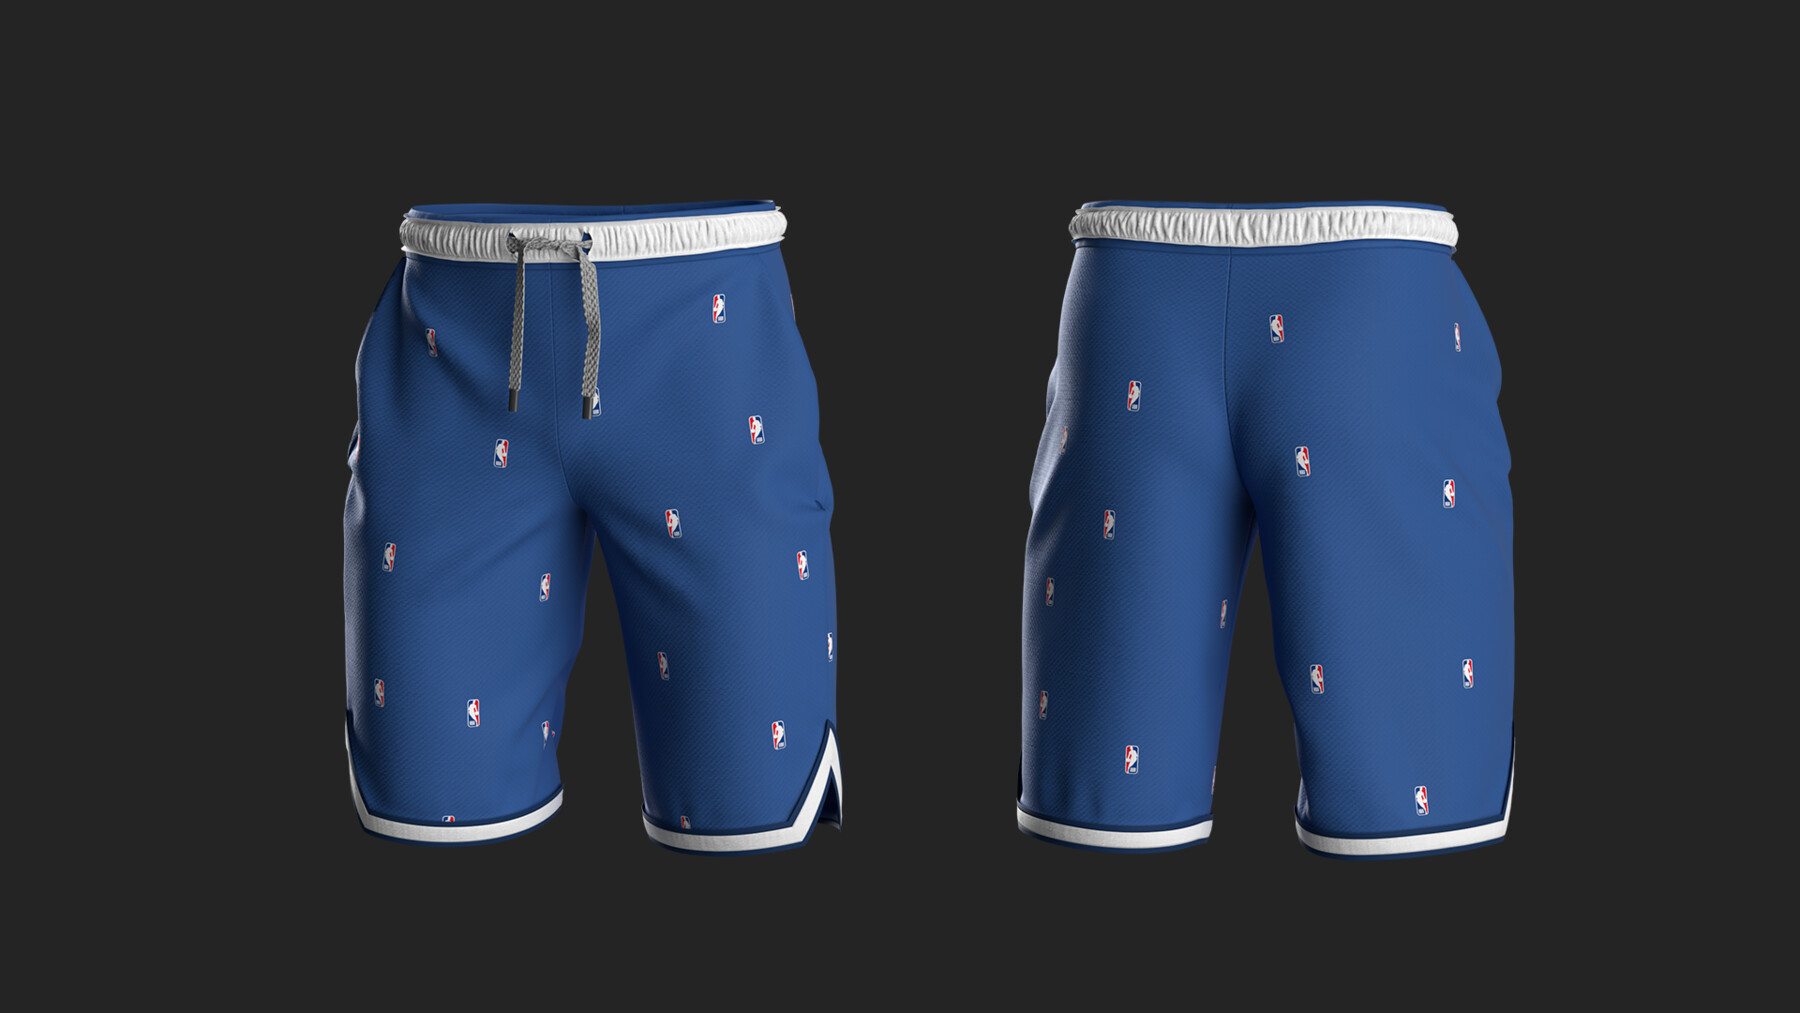 ArtStation - 3 Shorts. Clo3d, MD projects + OBJ. Sport collection